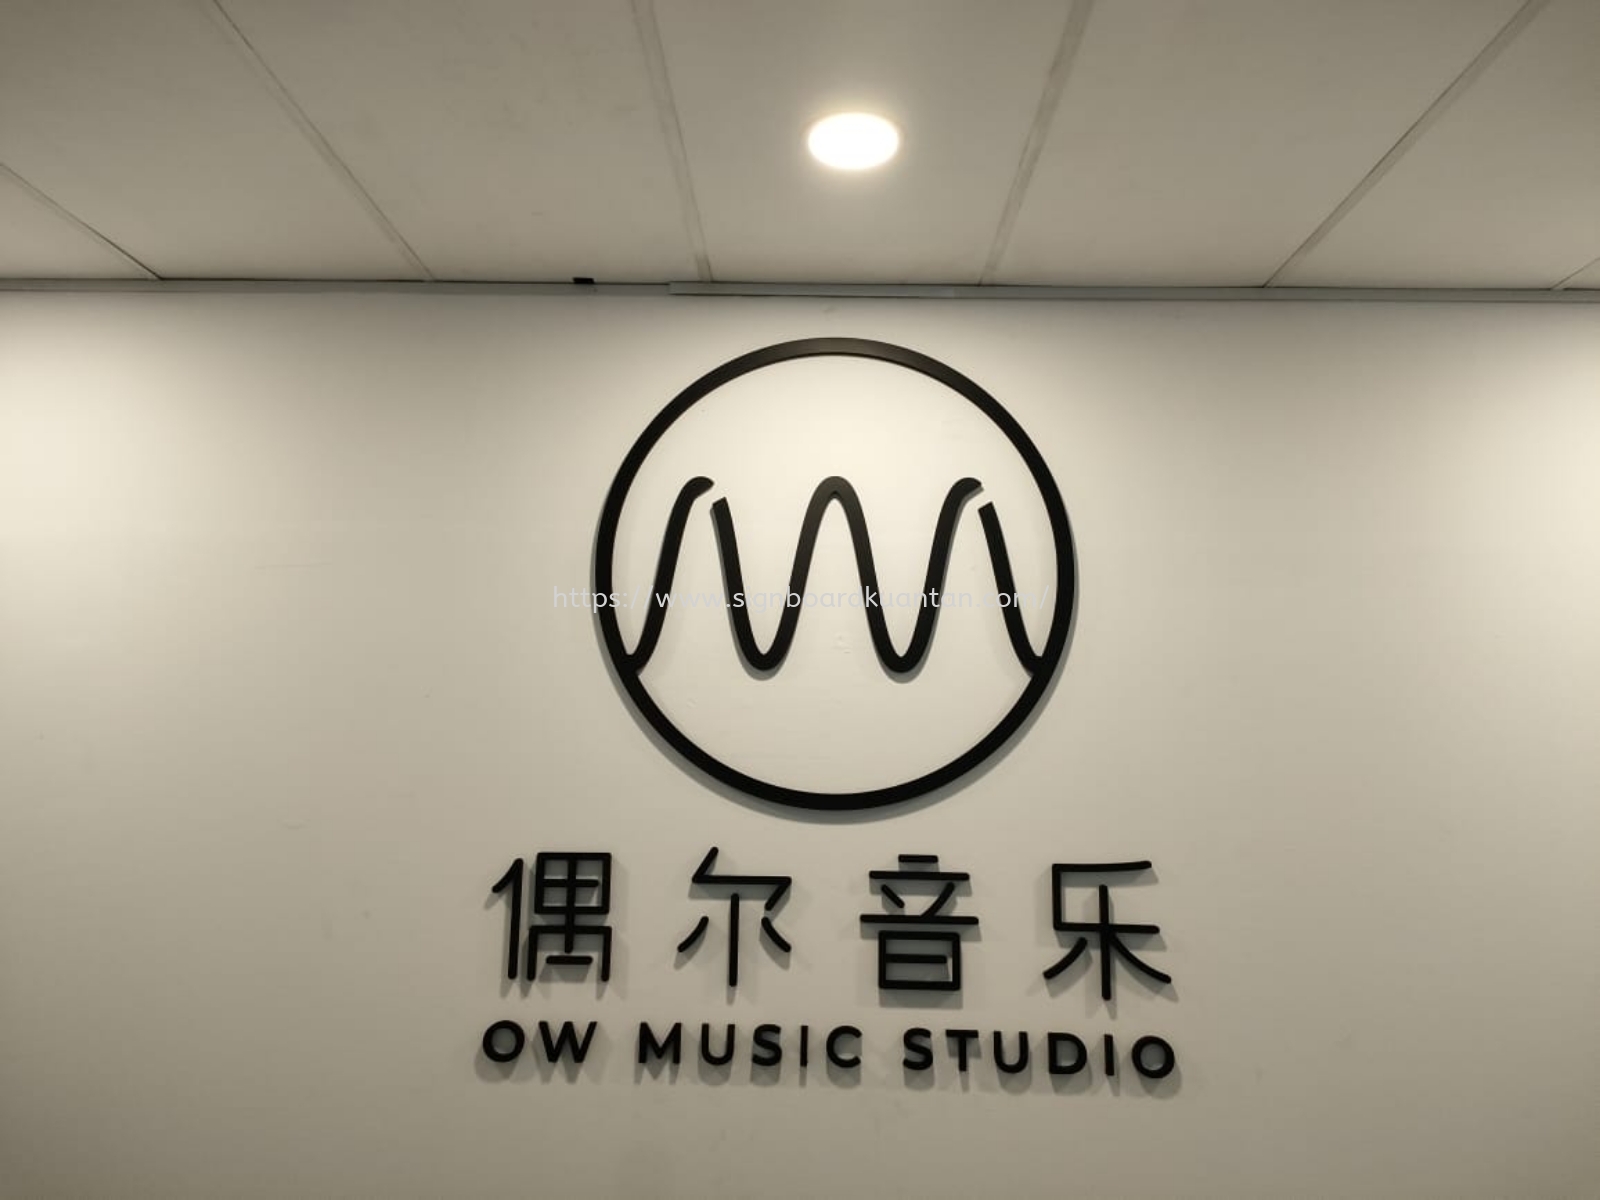 OW MUSIC STUDIO PVC LETTERING AND LOGO SIGNAGE SIGNBOARD AT KERTEH